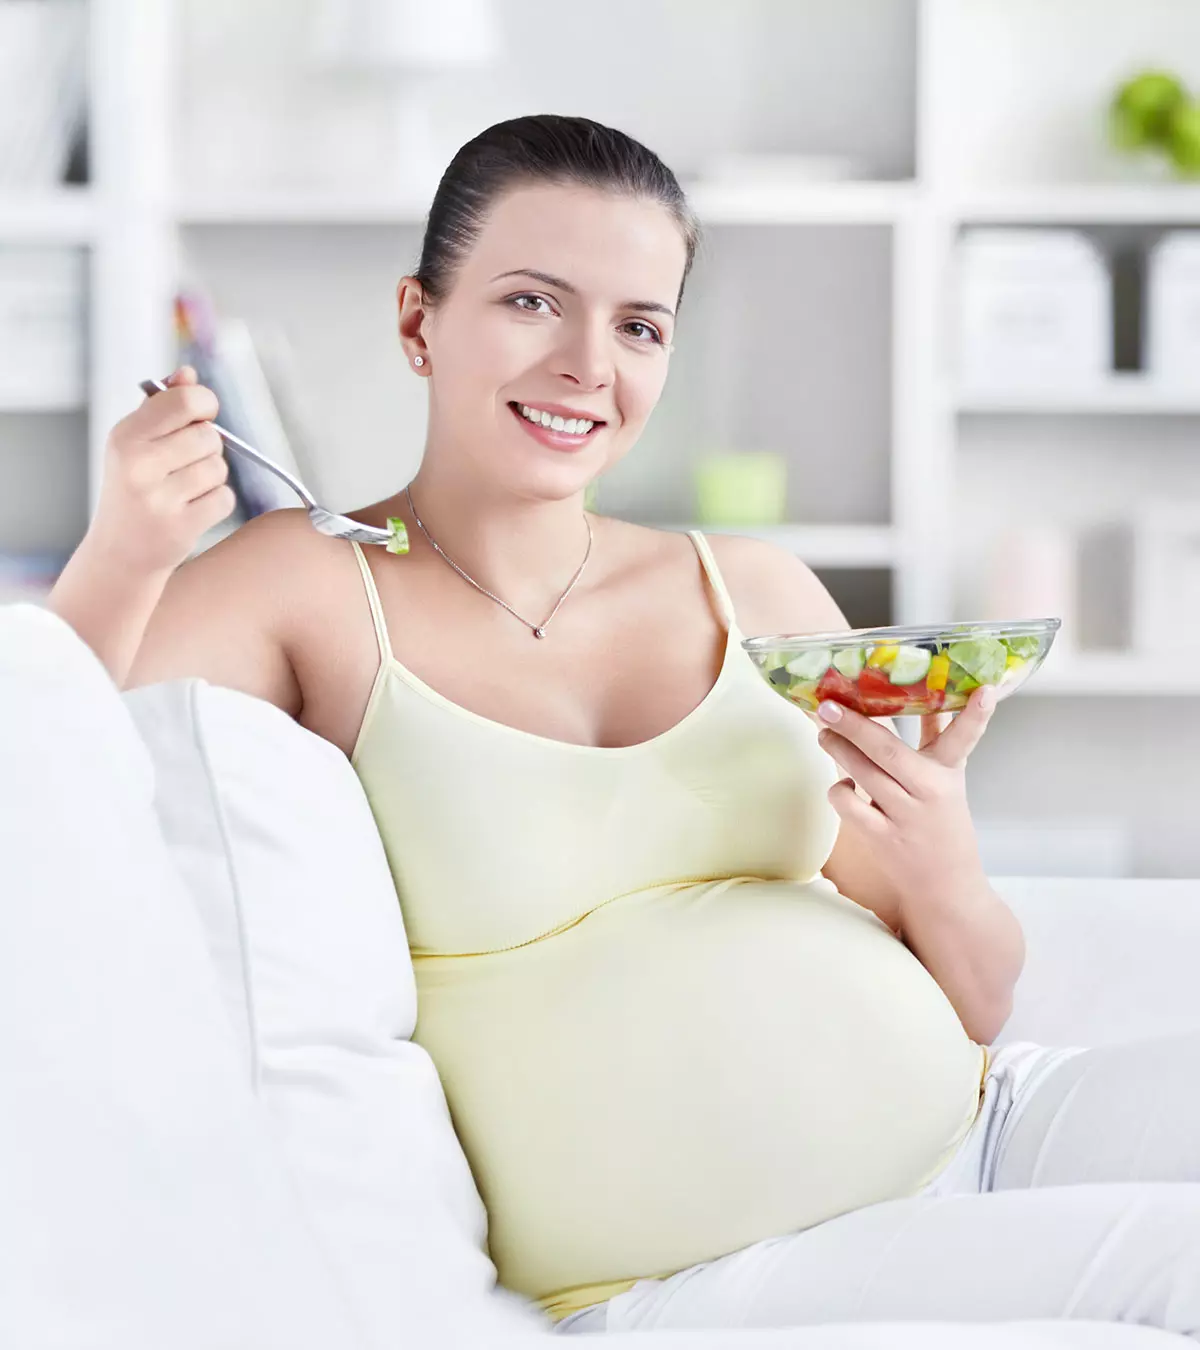 Healthy Vegetarian Recipes During Pregnancy